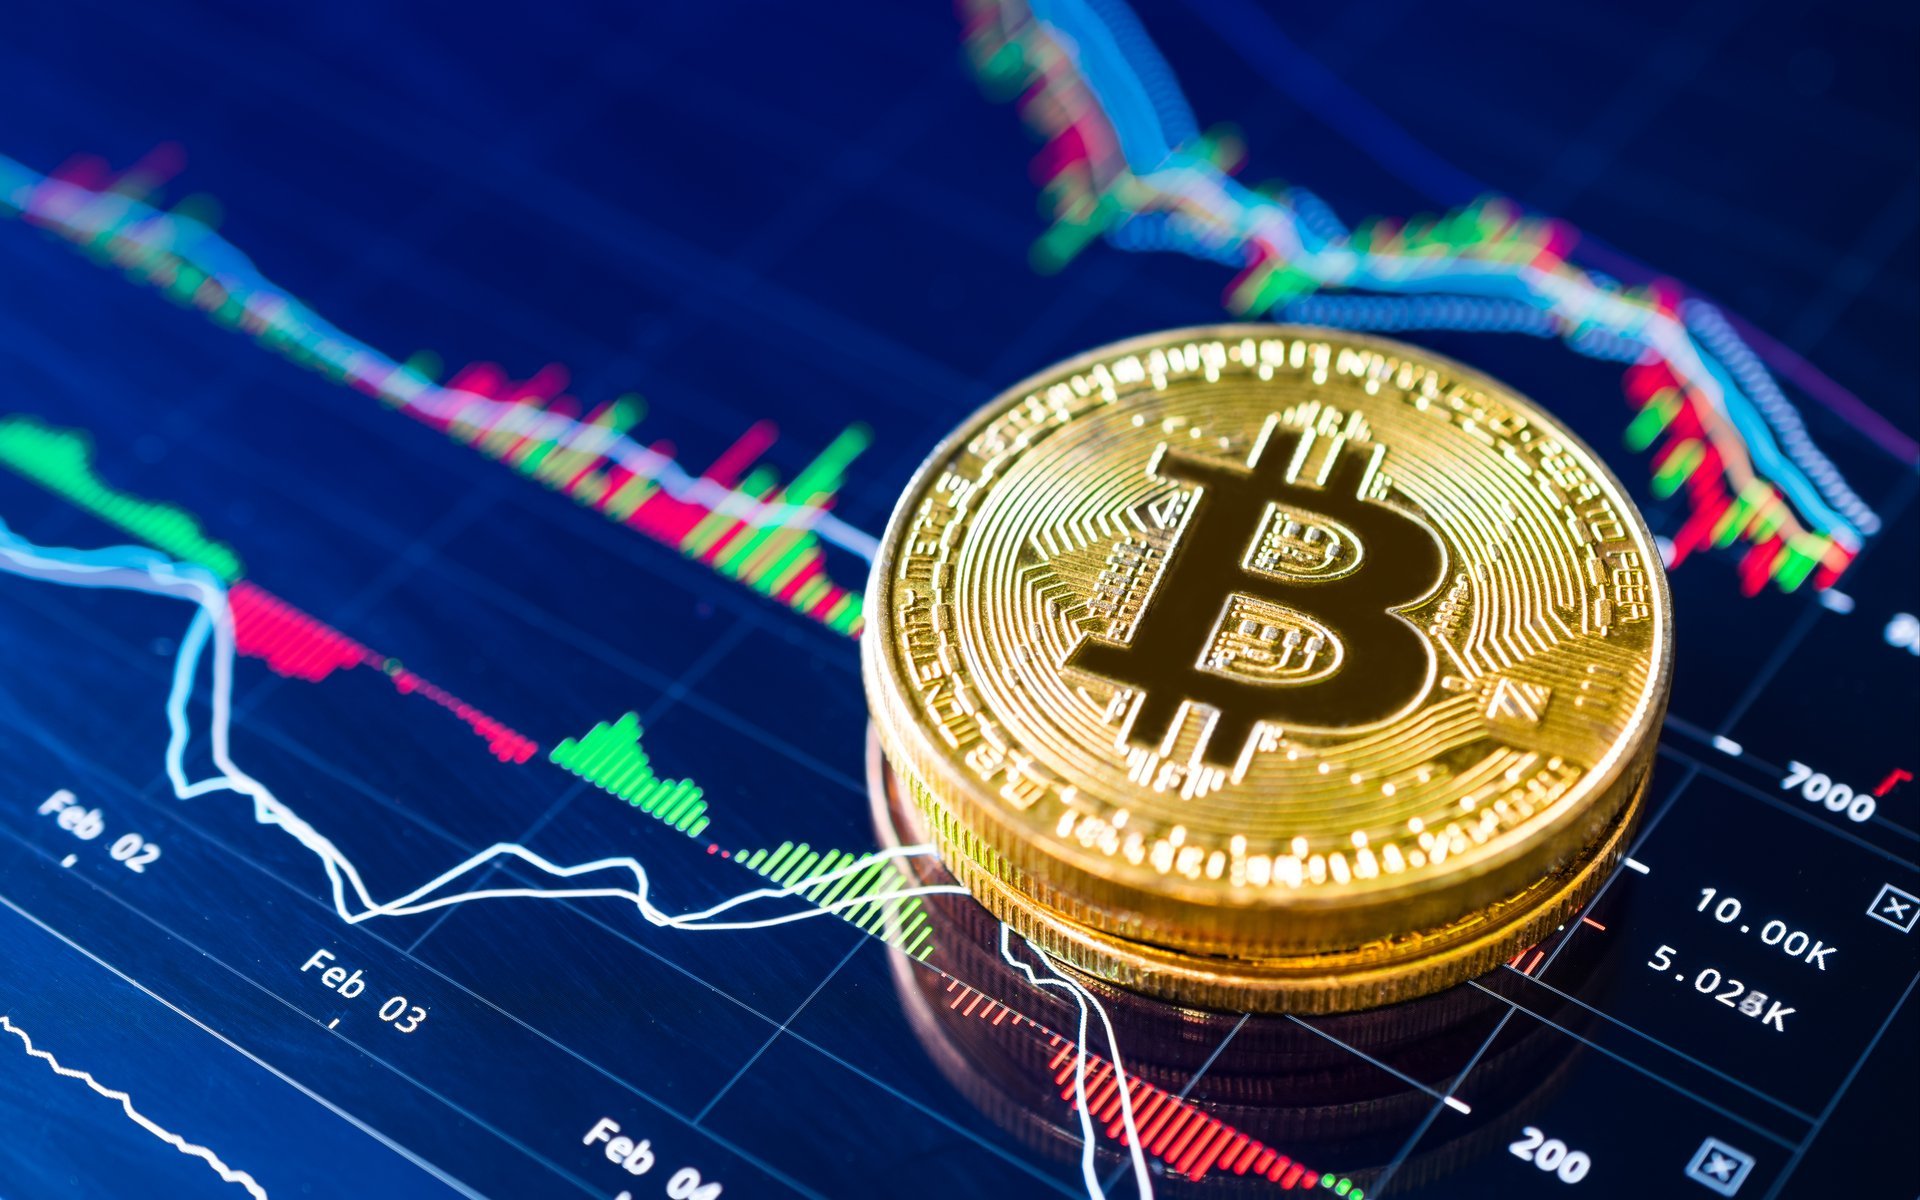 Bitcoin is back on the upward trend, with Positive Outlook